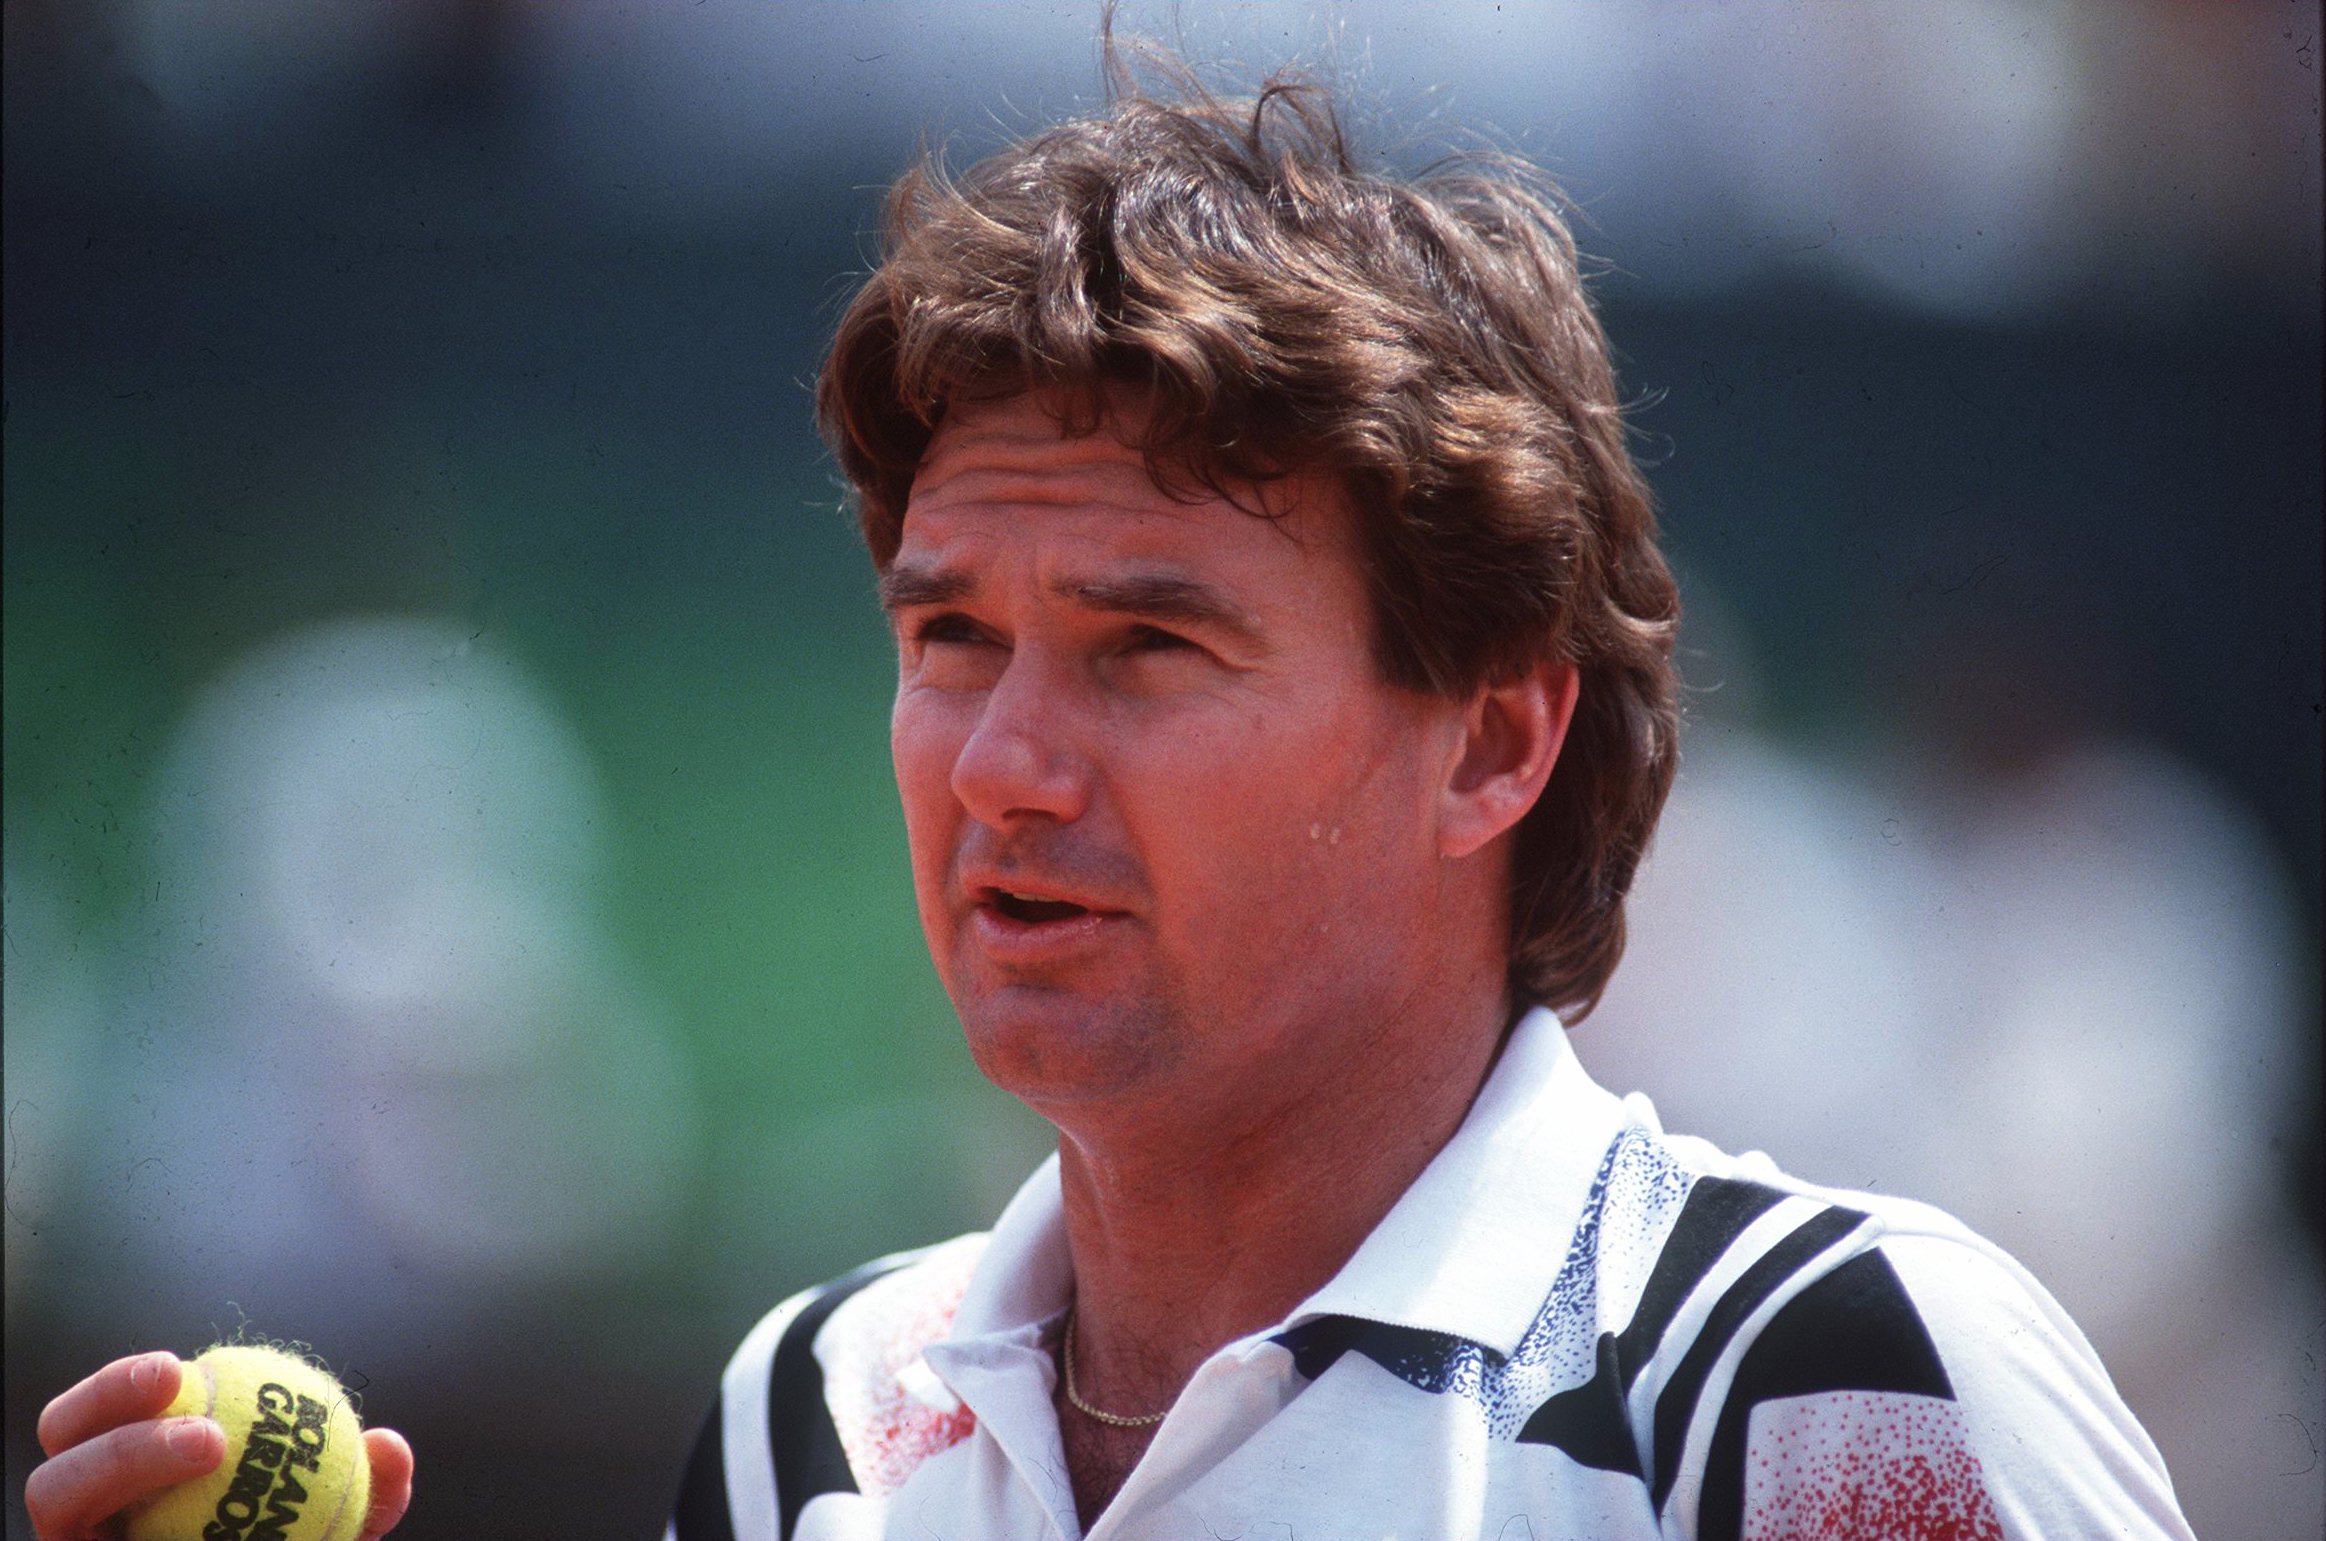 1992:  A PORTRAIT PICTURE OF JIMMY CONNORS OF THE UNITED STATES. (Photo by Chris Cole/Getty Images)